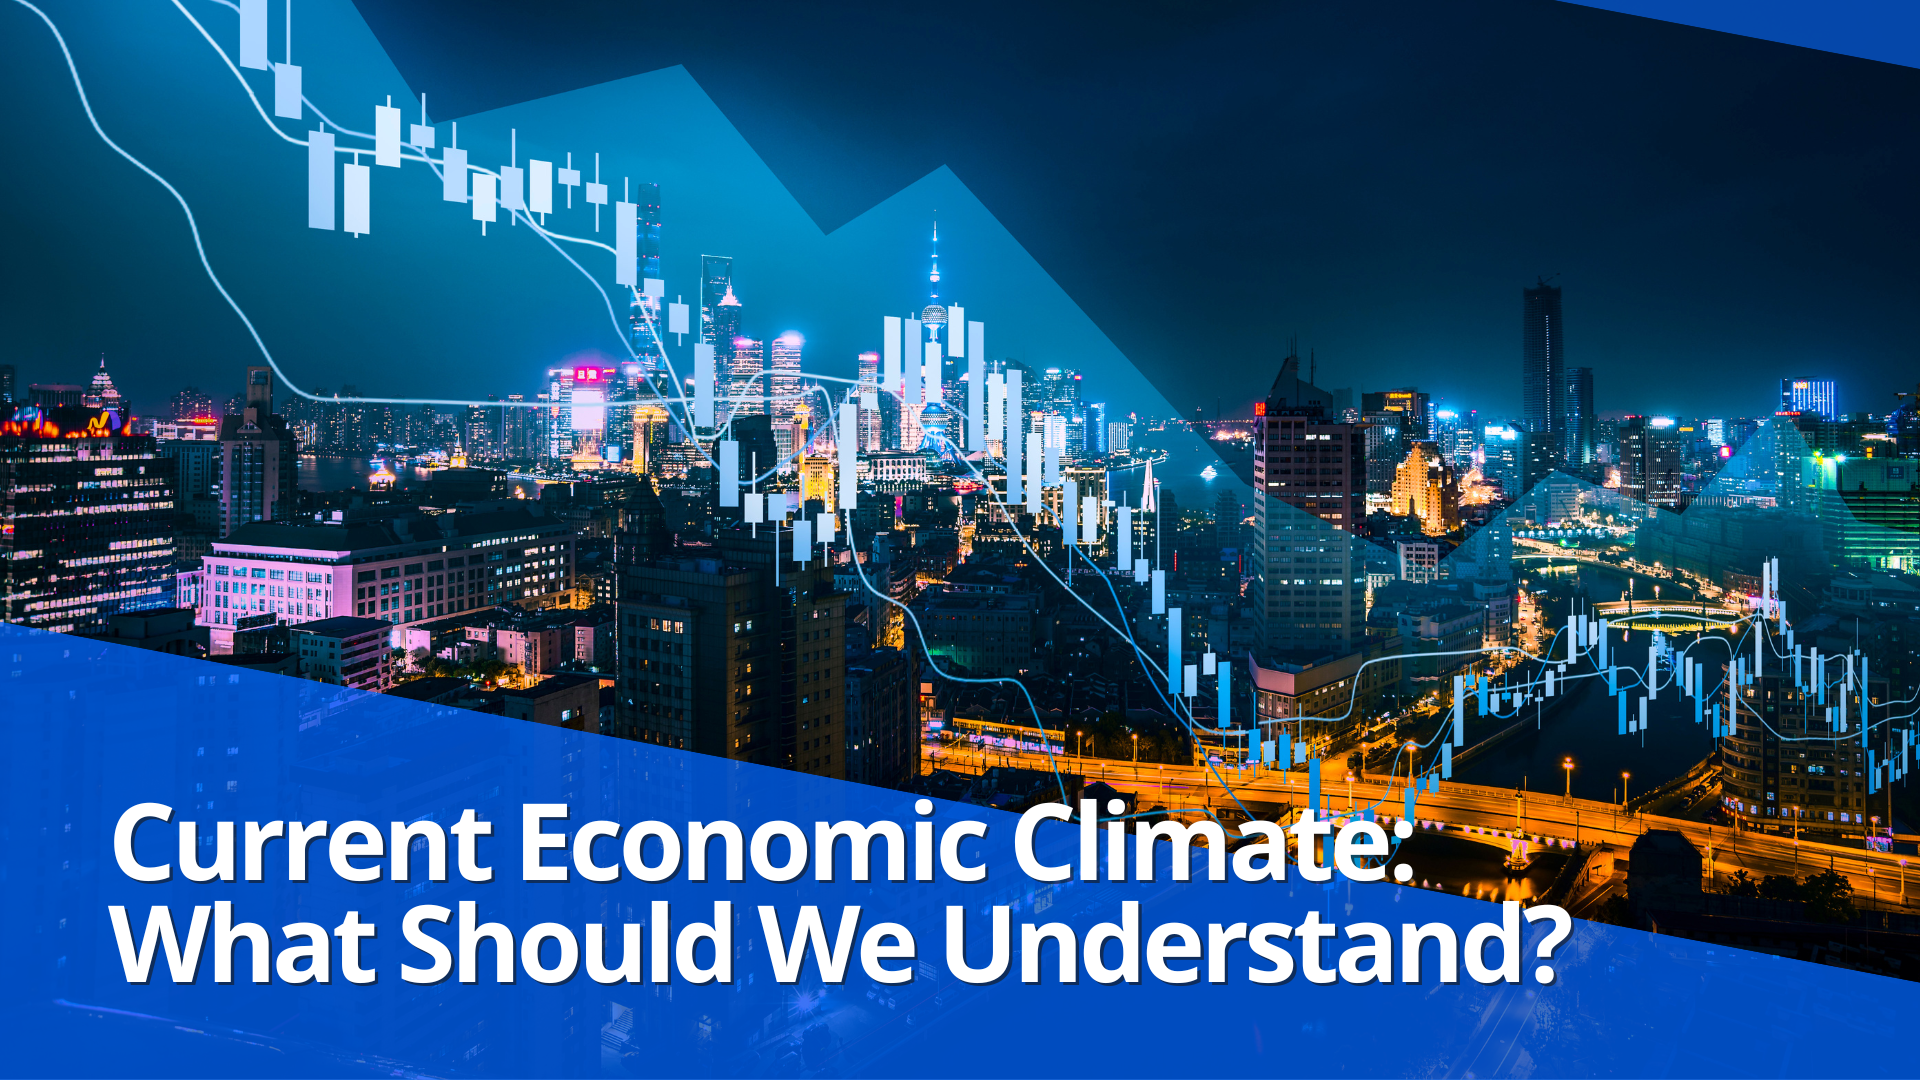 Current Economic Climate: What Should We Understand?